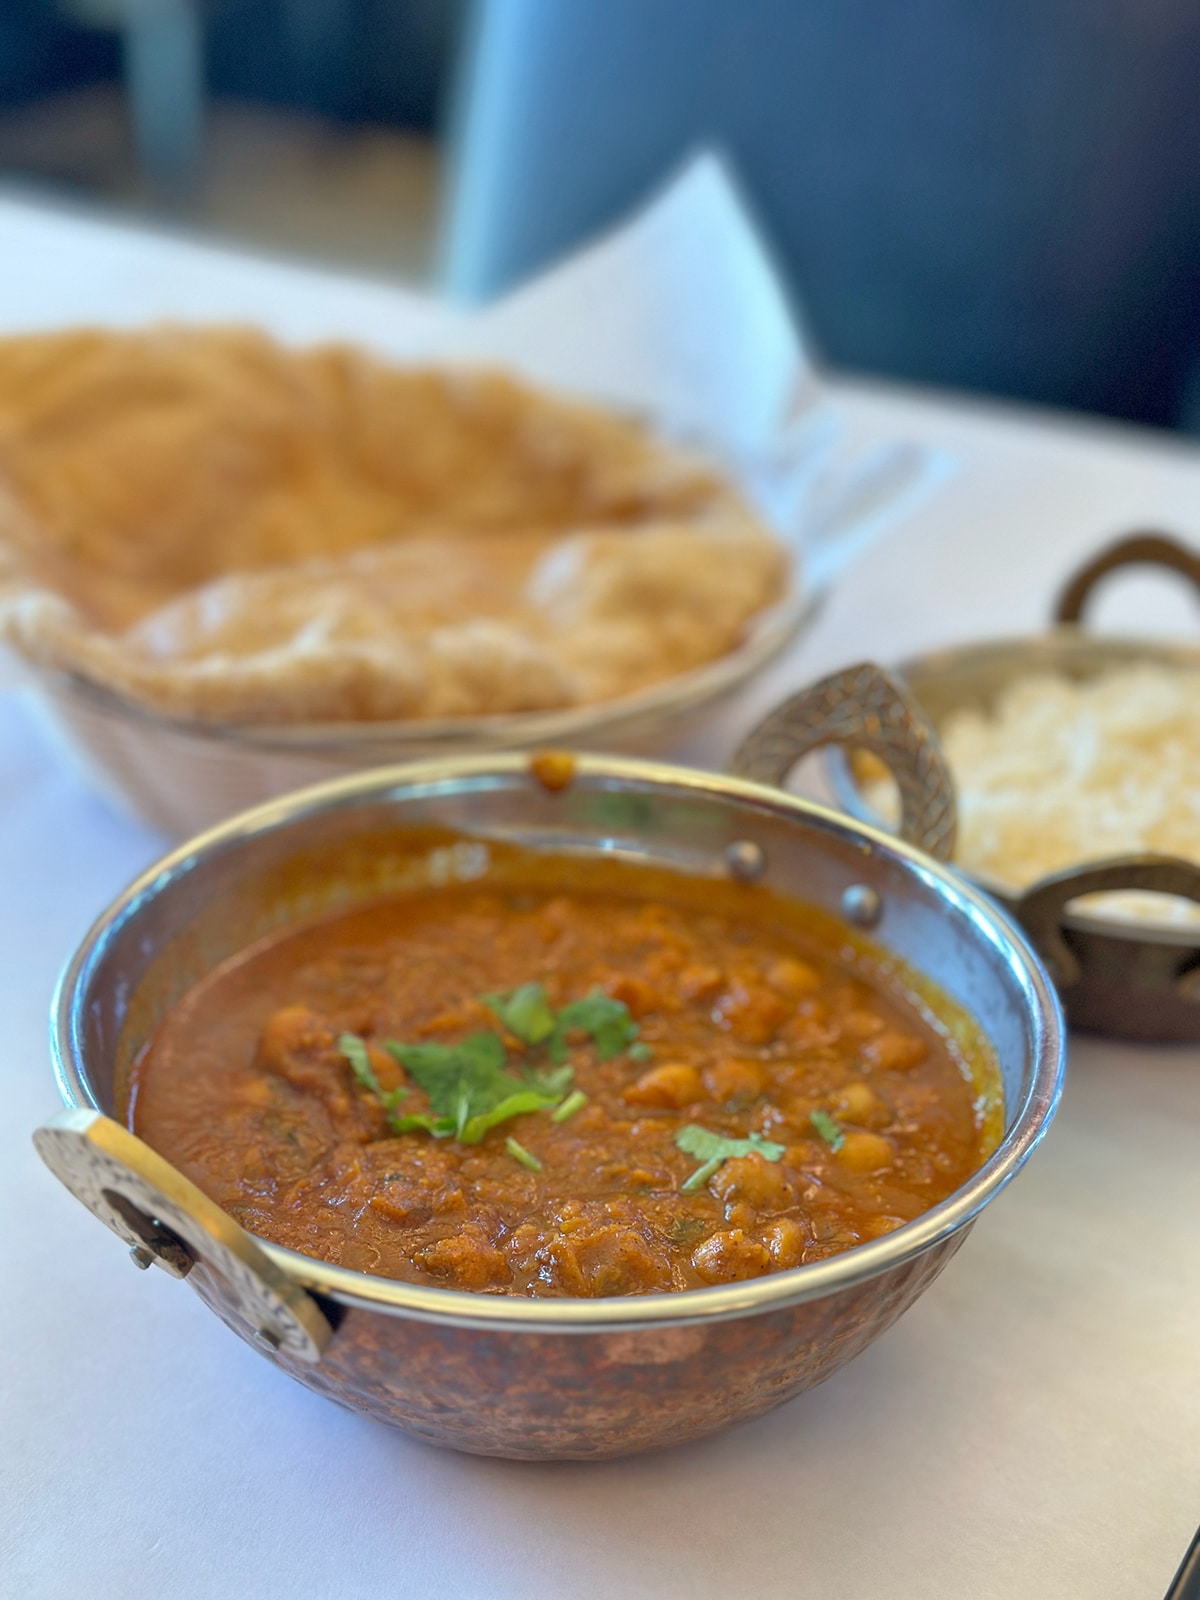 Punjabi chole in metal bowl by rice and bread.